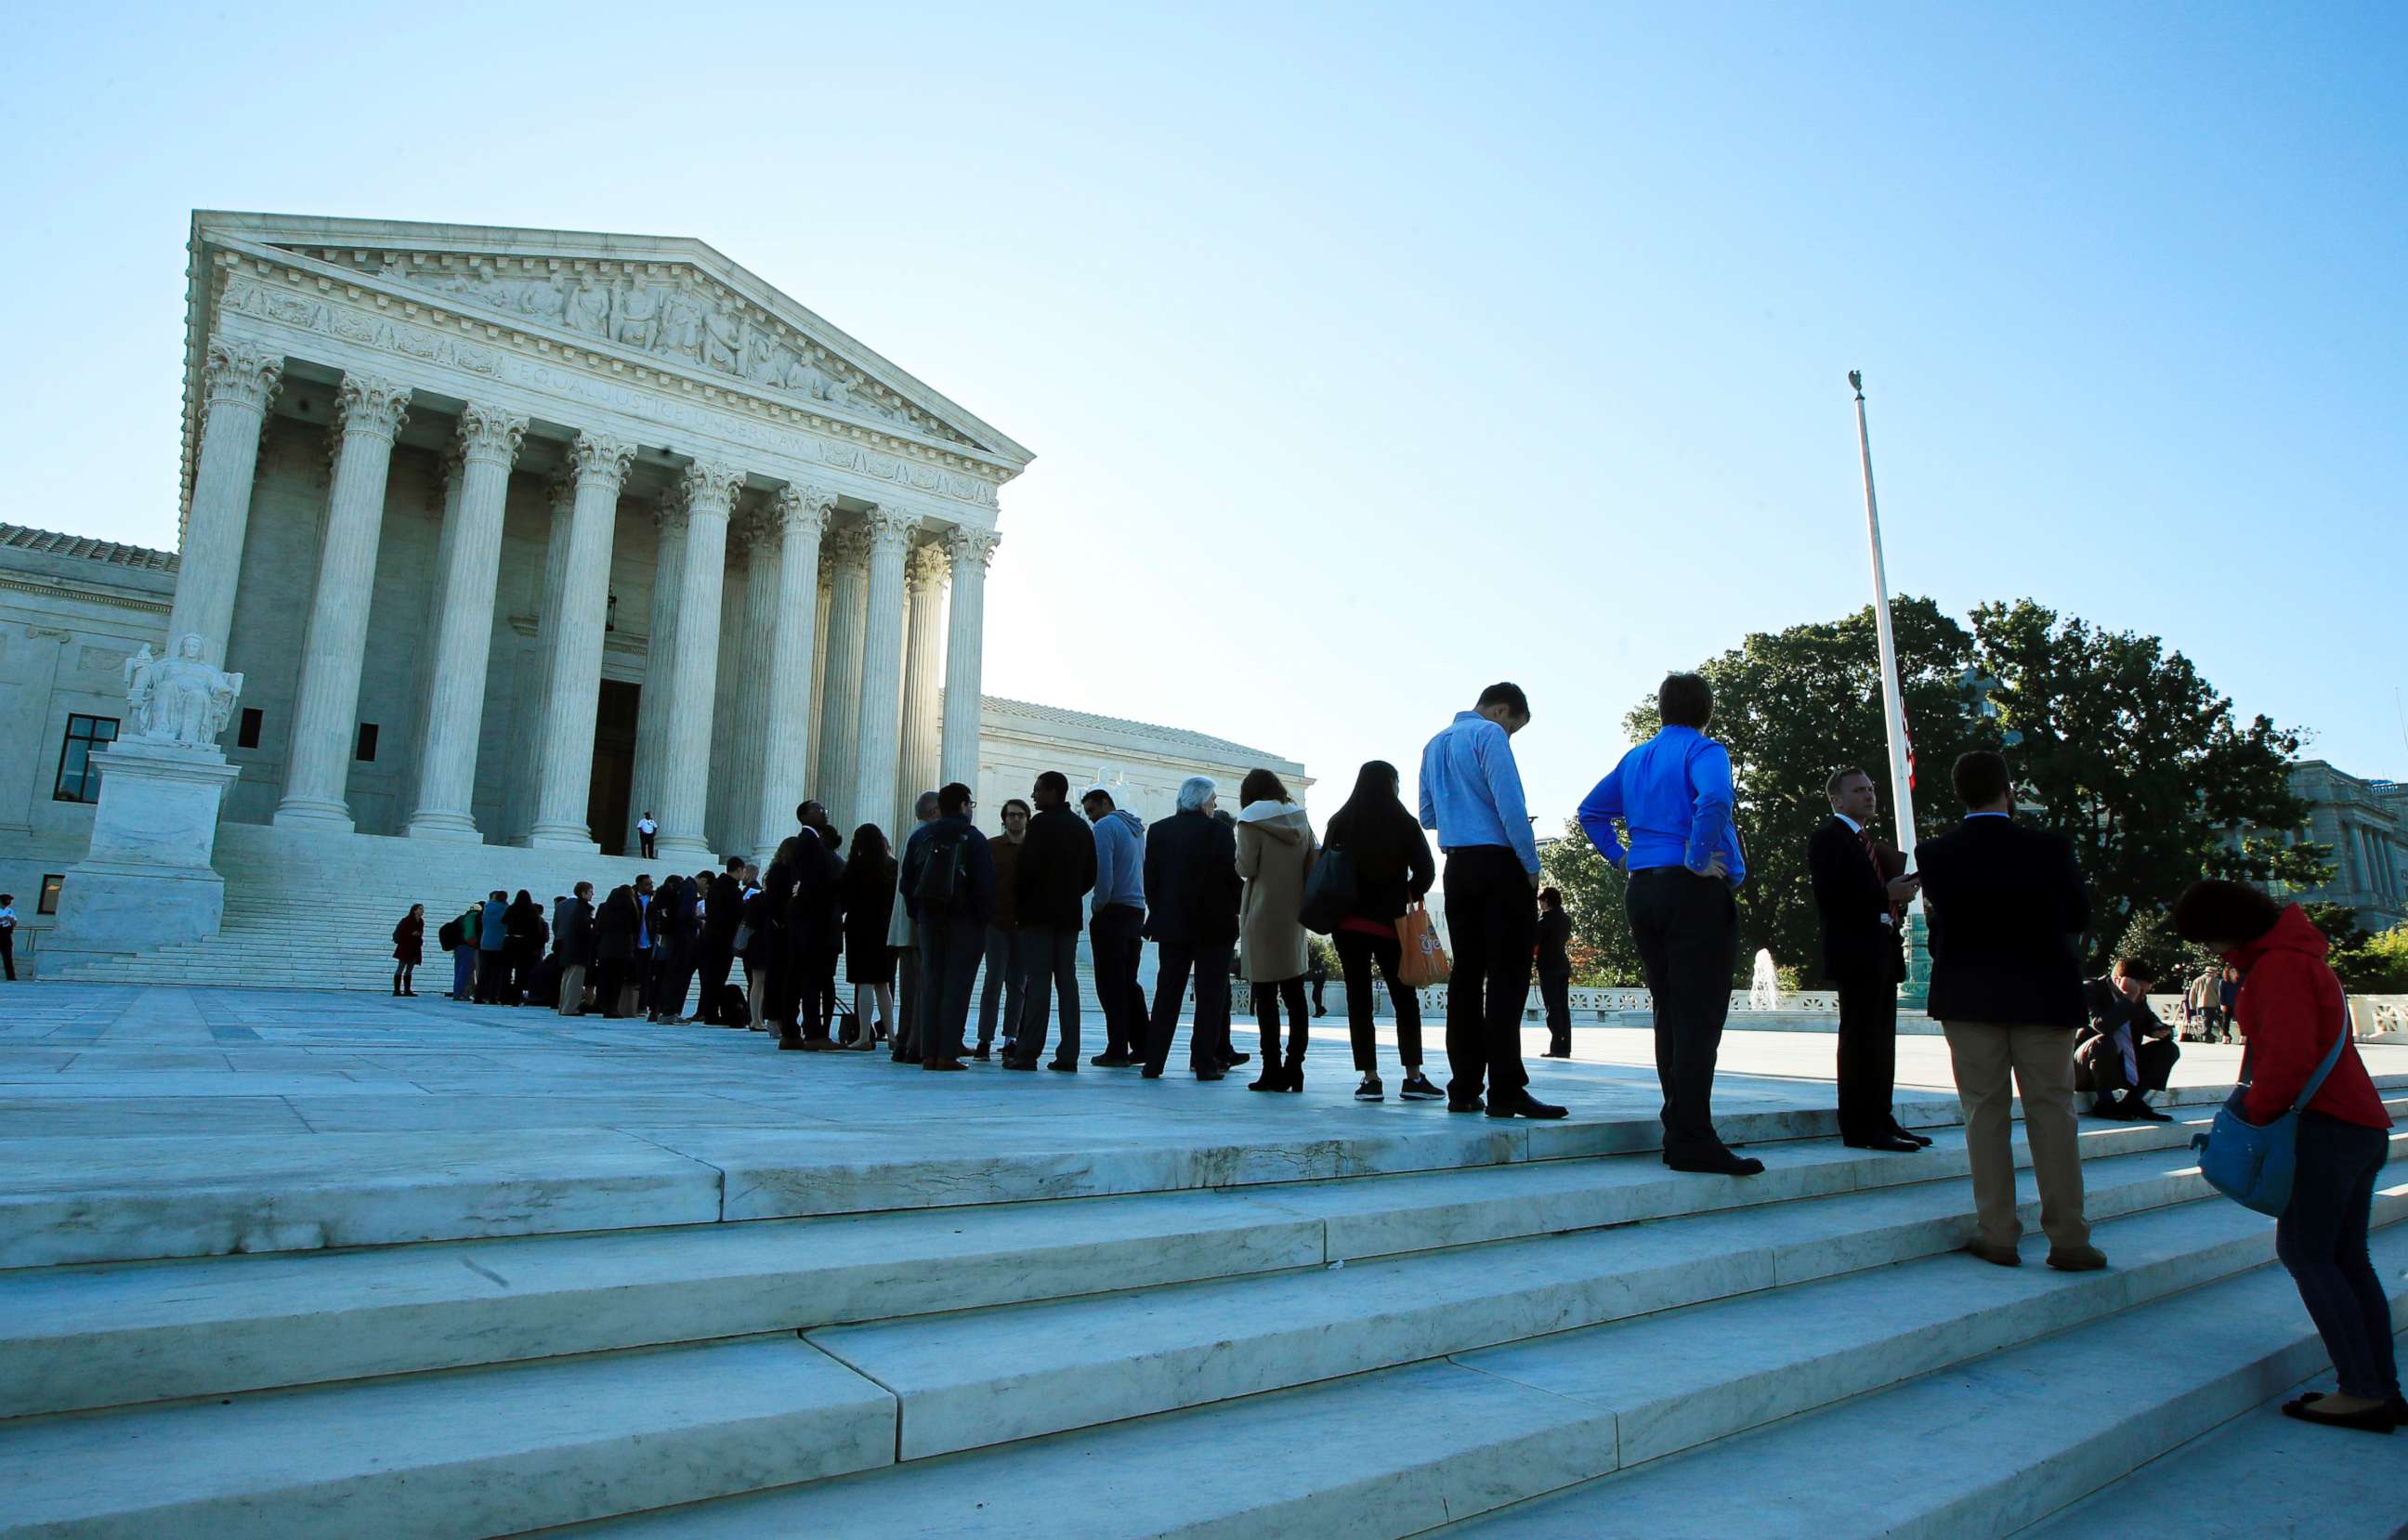 PHOTO: People line up outside the U.S. Supreme Court in Washington to hear arguments in a case about political maps in Wisconsin that could affect elections across the country, Oct. 3, 2017.